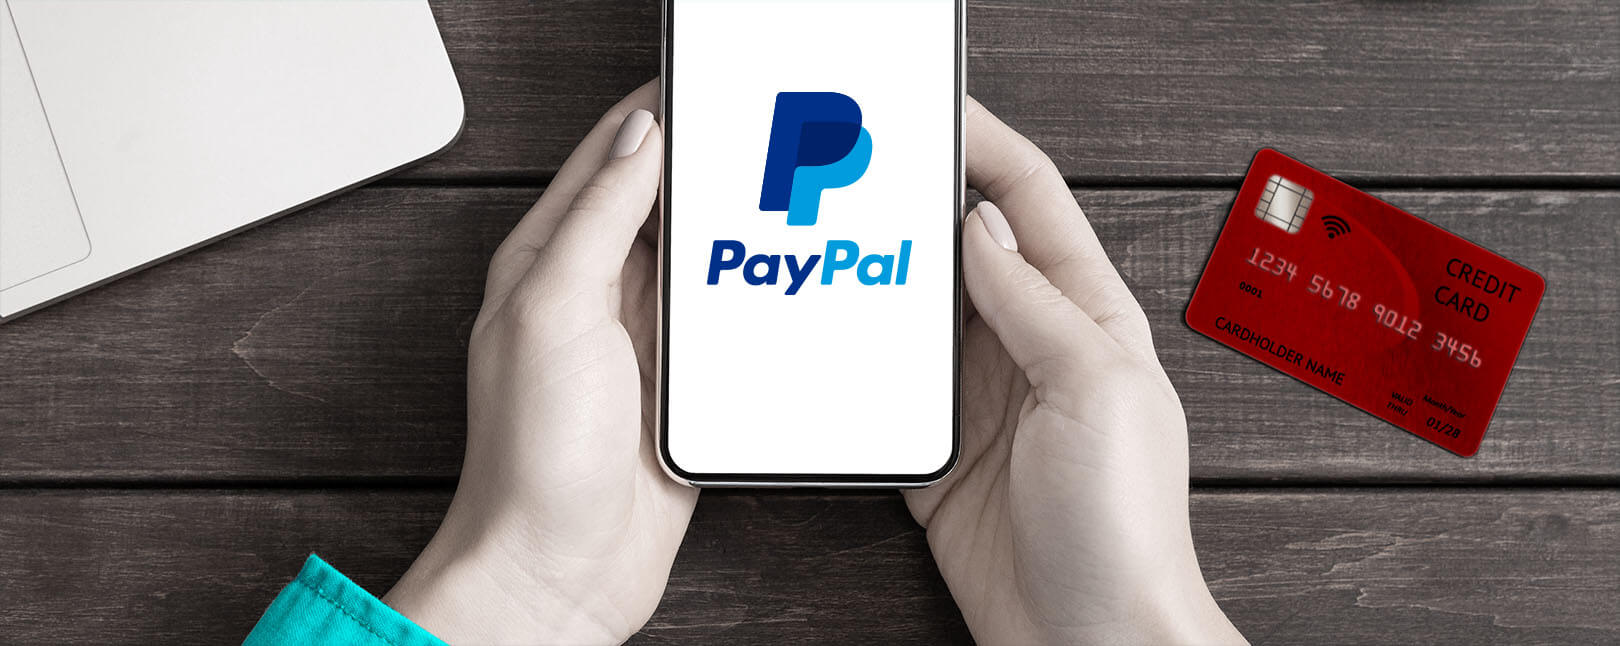 PayPal Chargebacks: All the Rules, Fees, & Time Limits You Need to Know